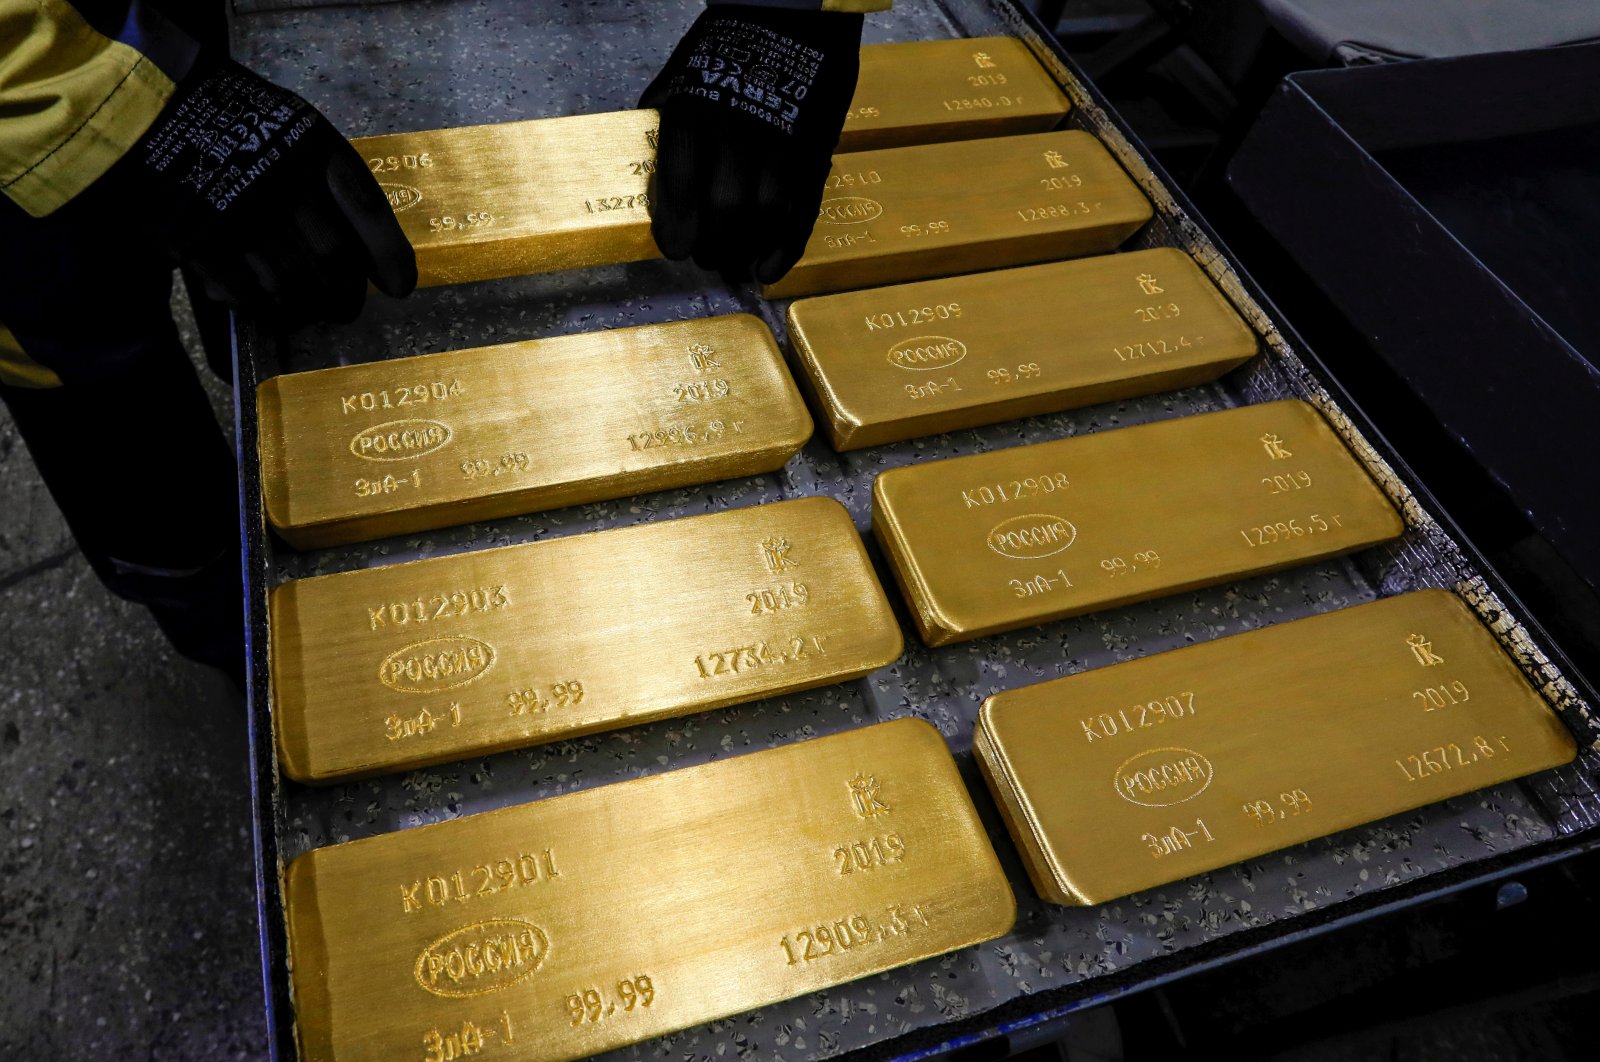 An employee stores marked ingots of 99.99% pure gold on a cart at a plant in Krasnoyarsk, Russia, April 9, 2019. (Reuters Photo)